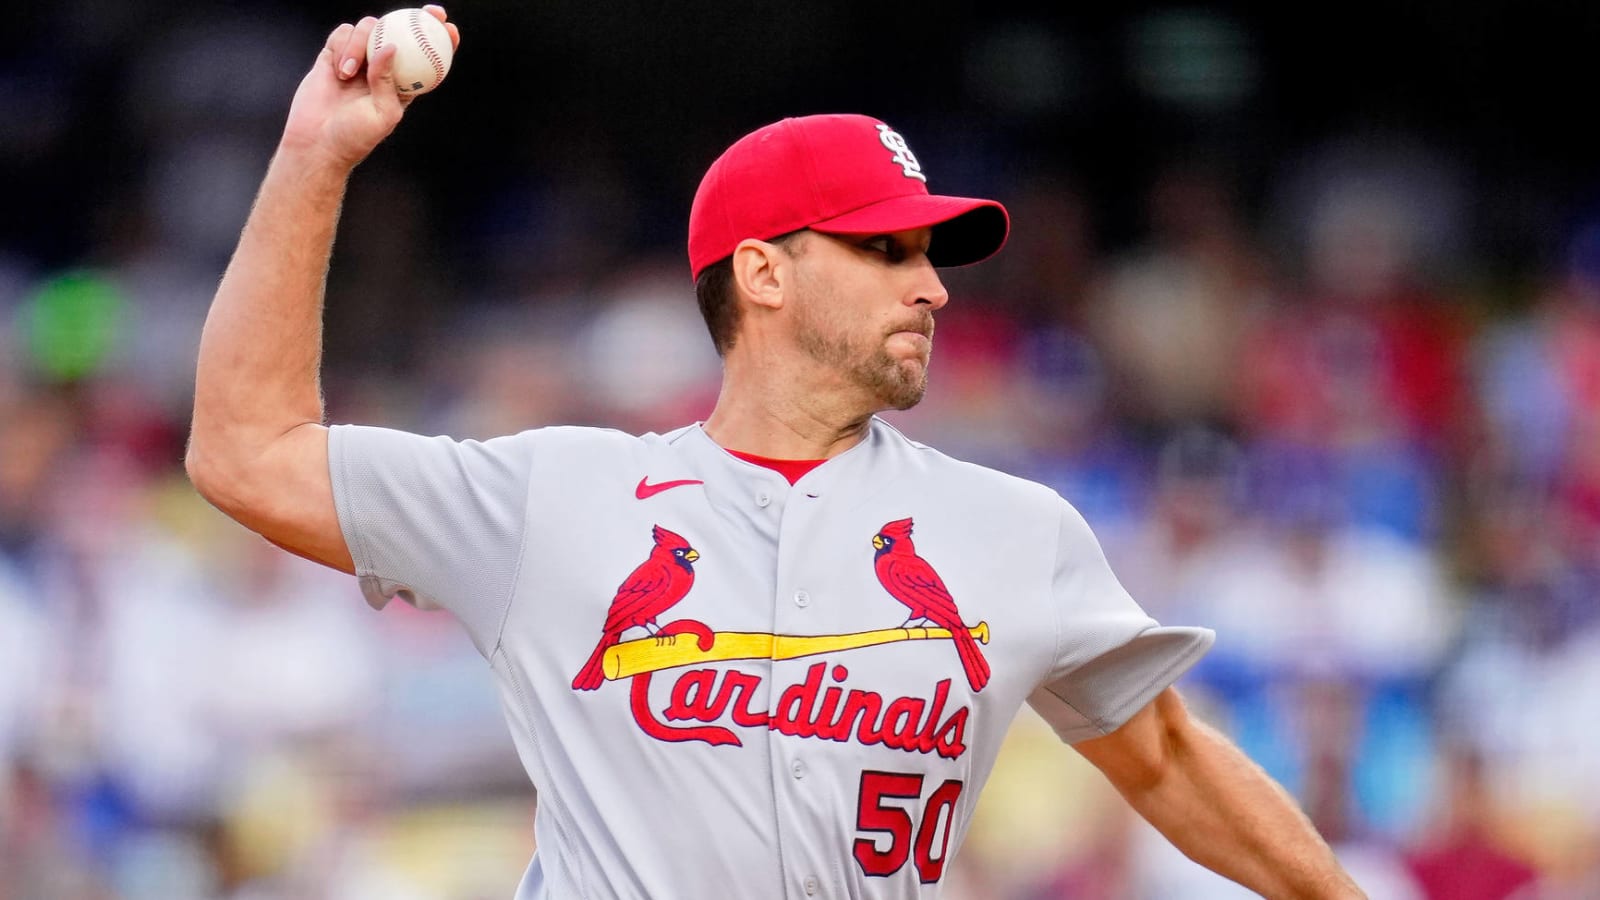 Adam Wainwright had great reaction after sweet defensive play